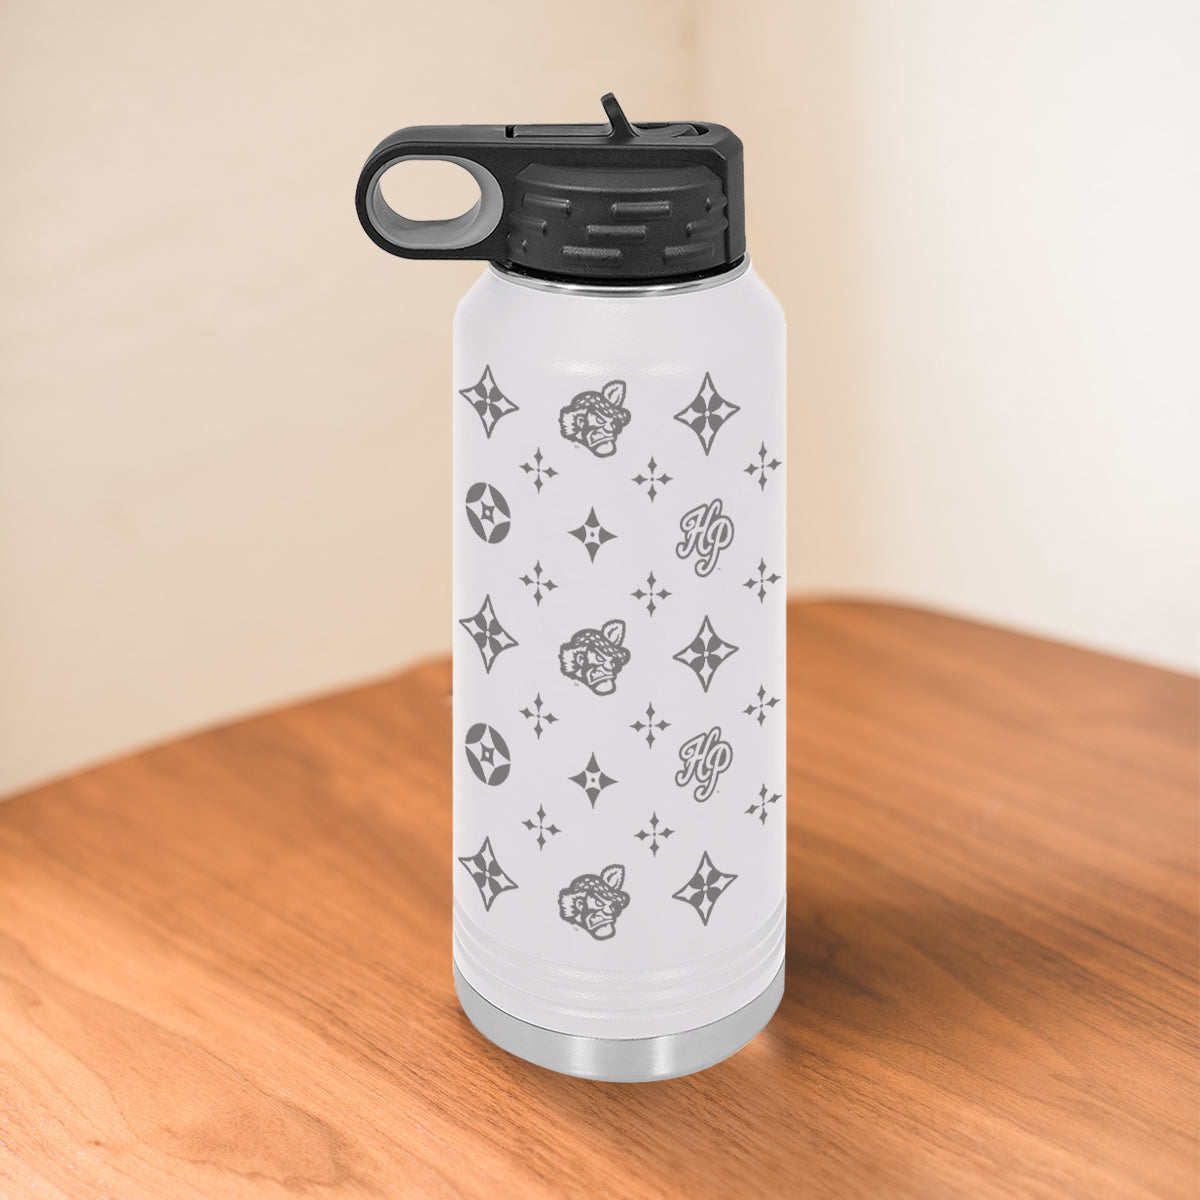 Customized White Thermo Flask - Pablo Gift Shop